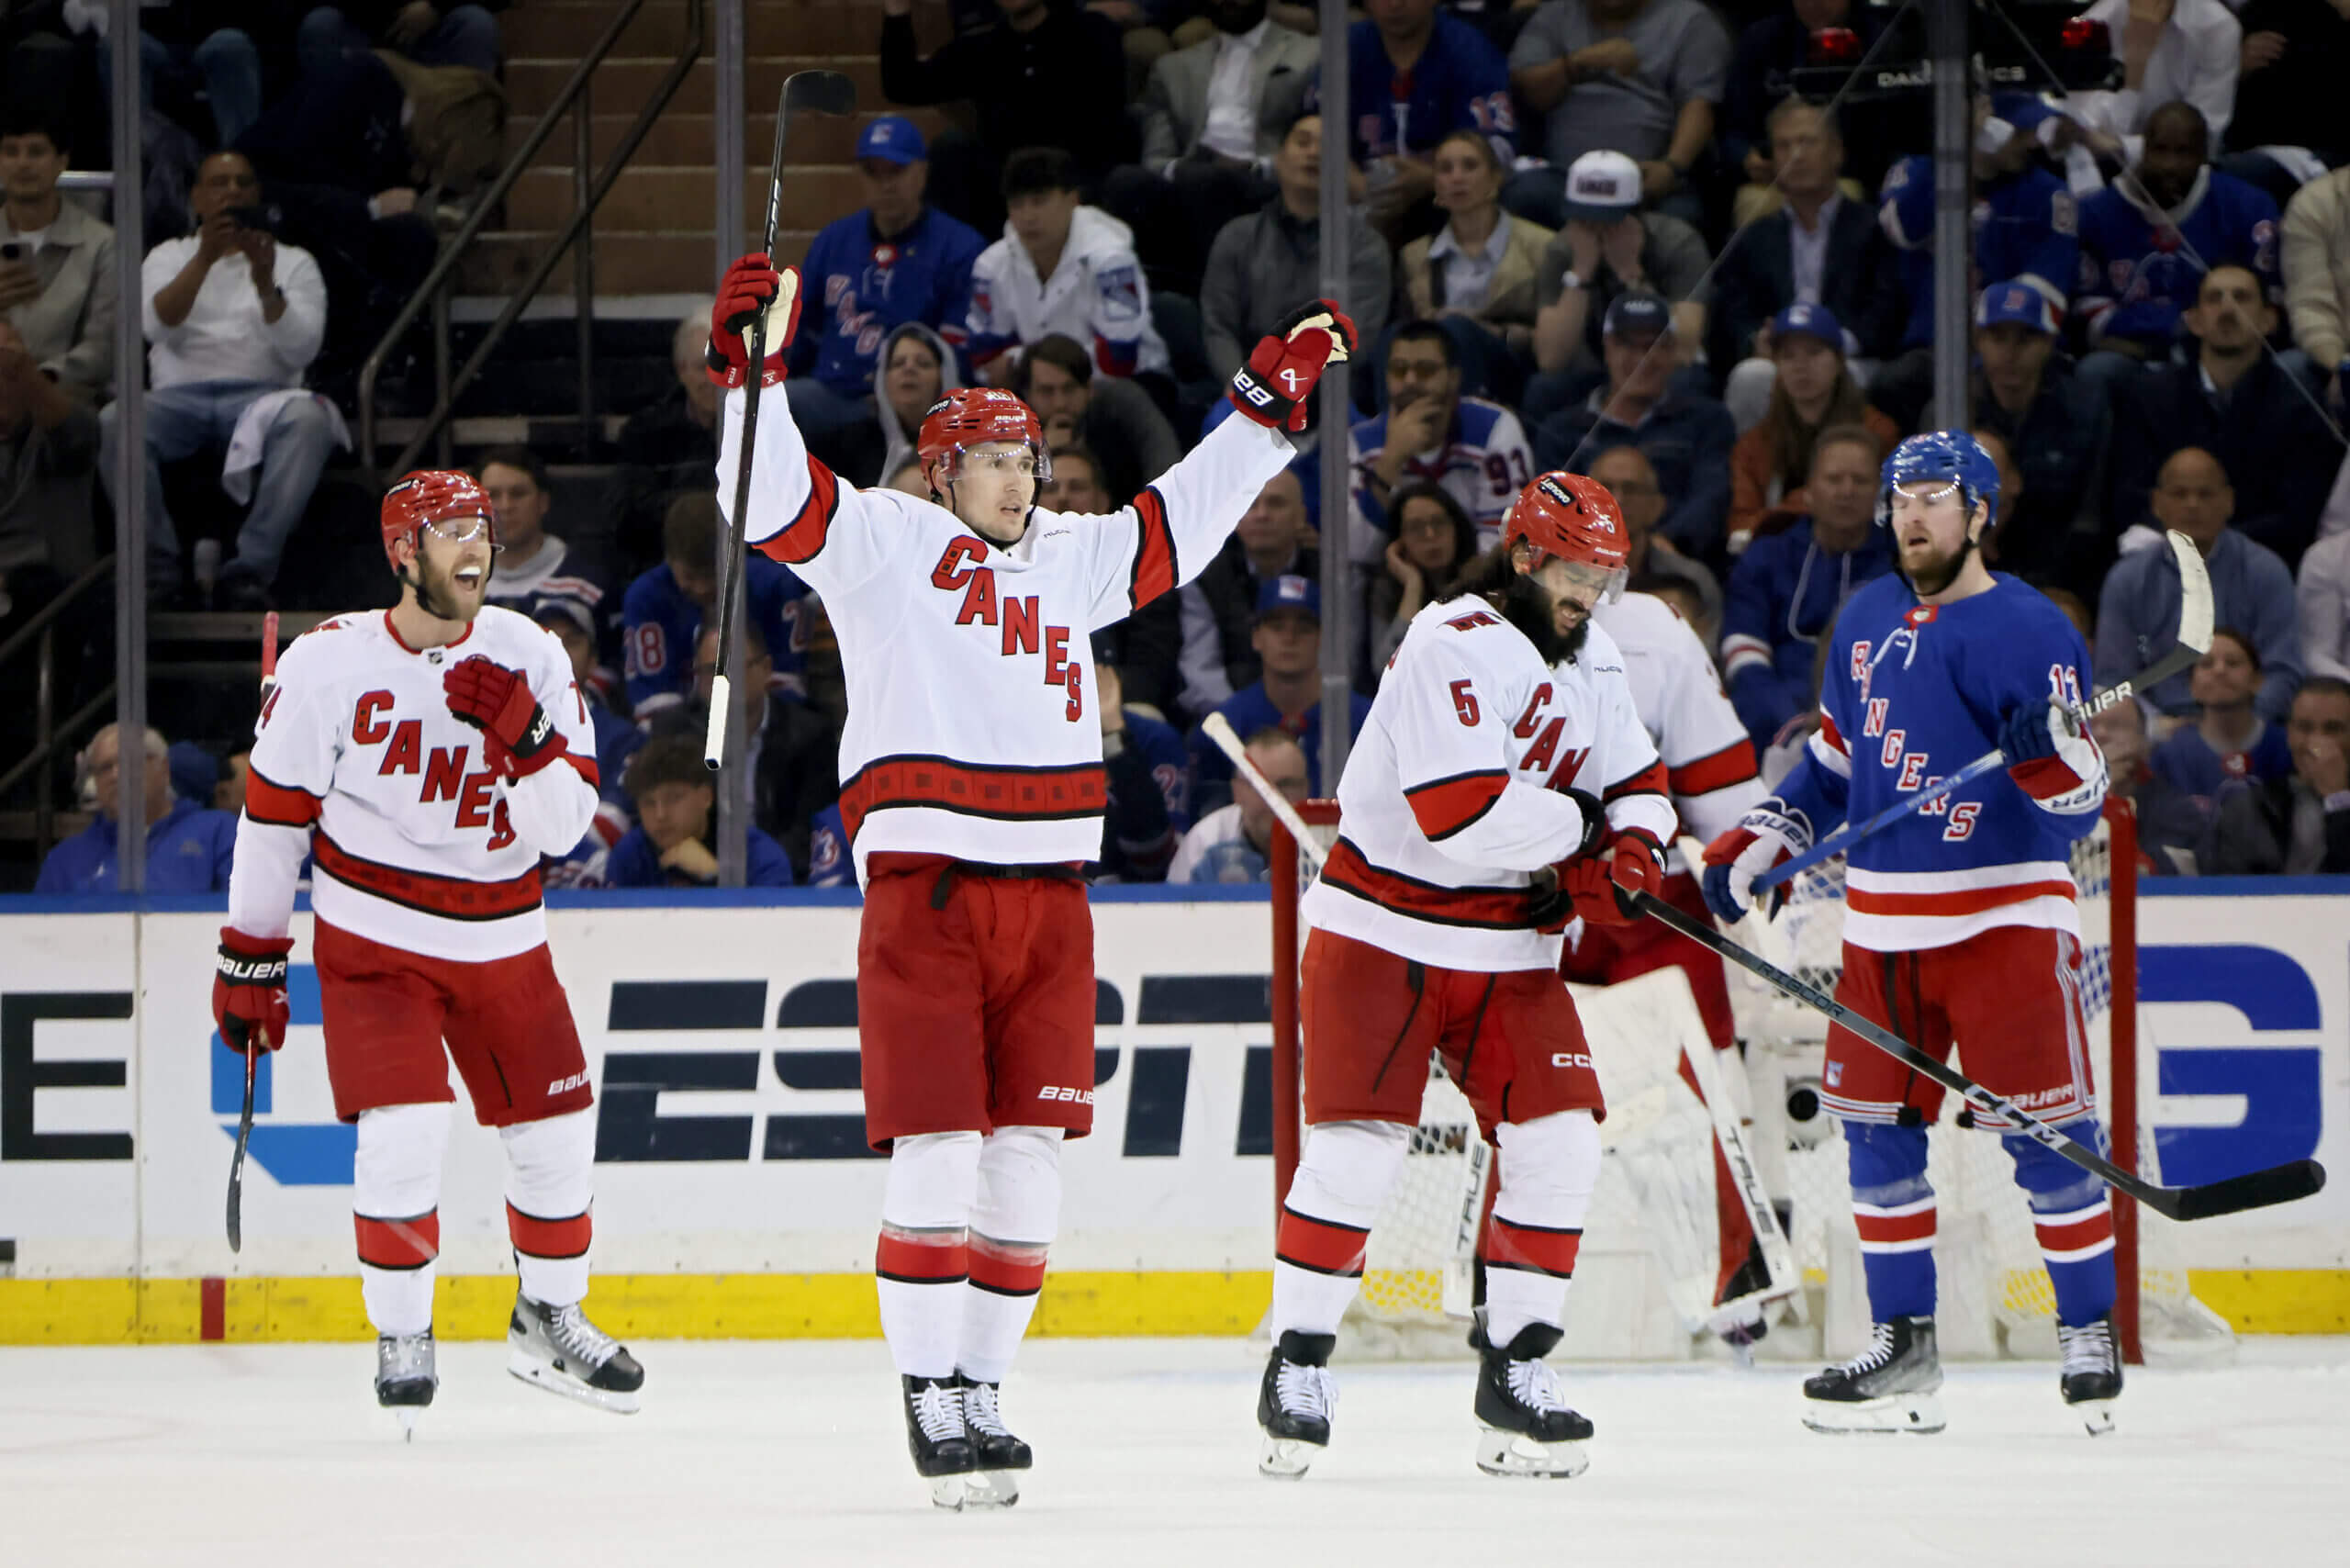 With Rangers struggling, Hurricanes are testing New York's winning formula